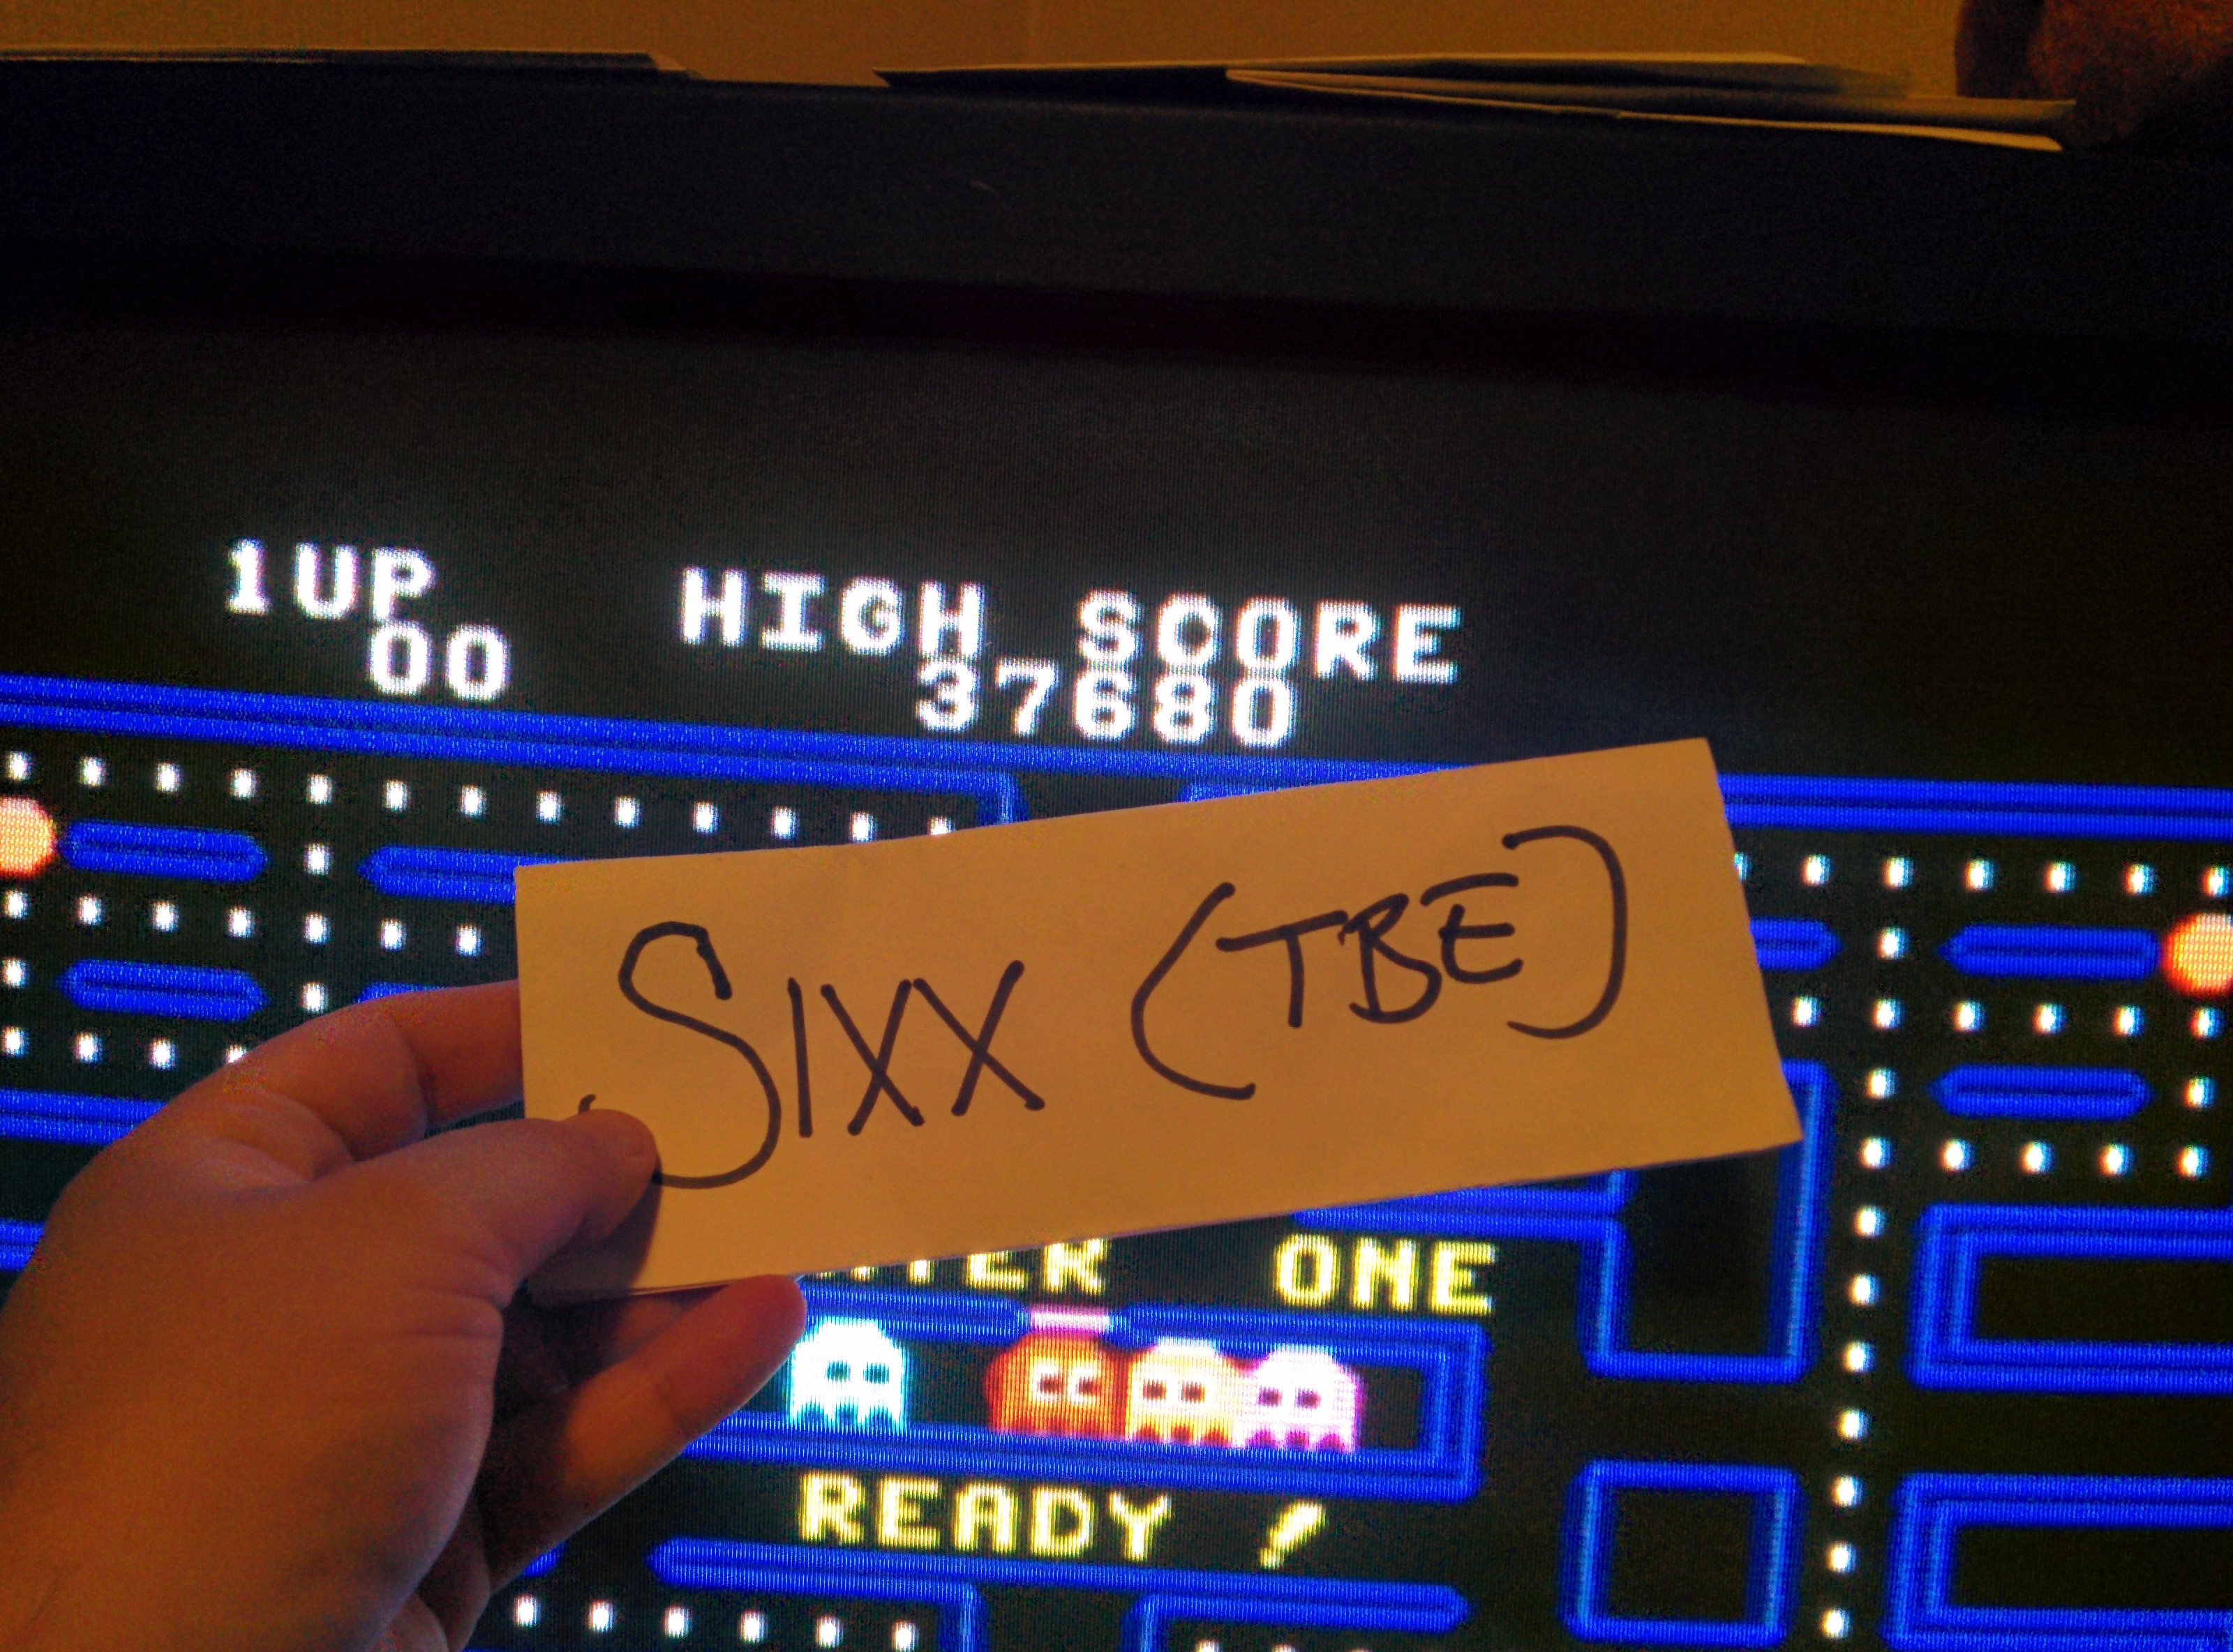 Sixx: Pac-Man (Colecovision Emulated) 37,680 points on 2014-07-27 15:45:32